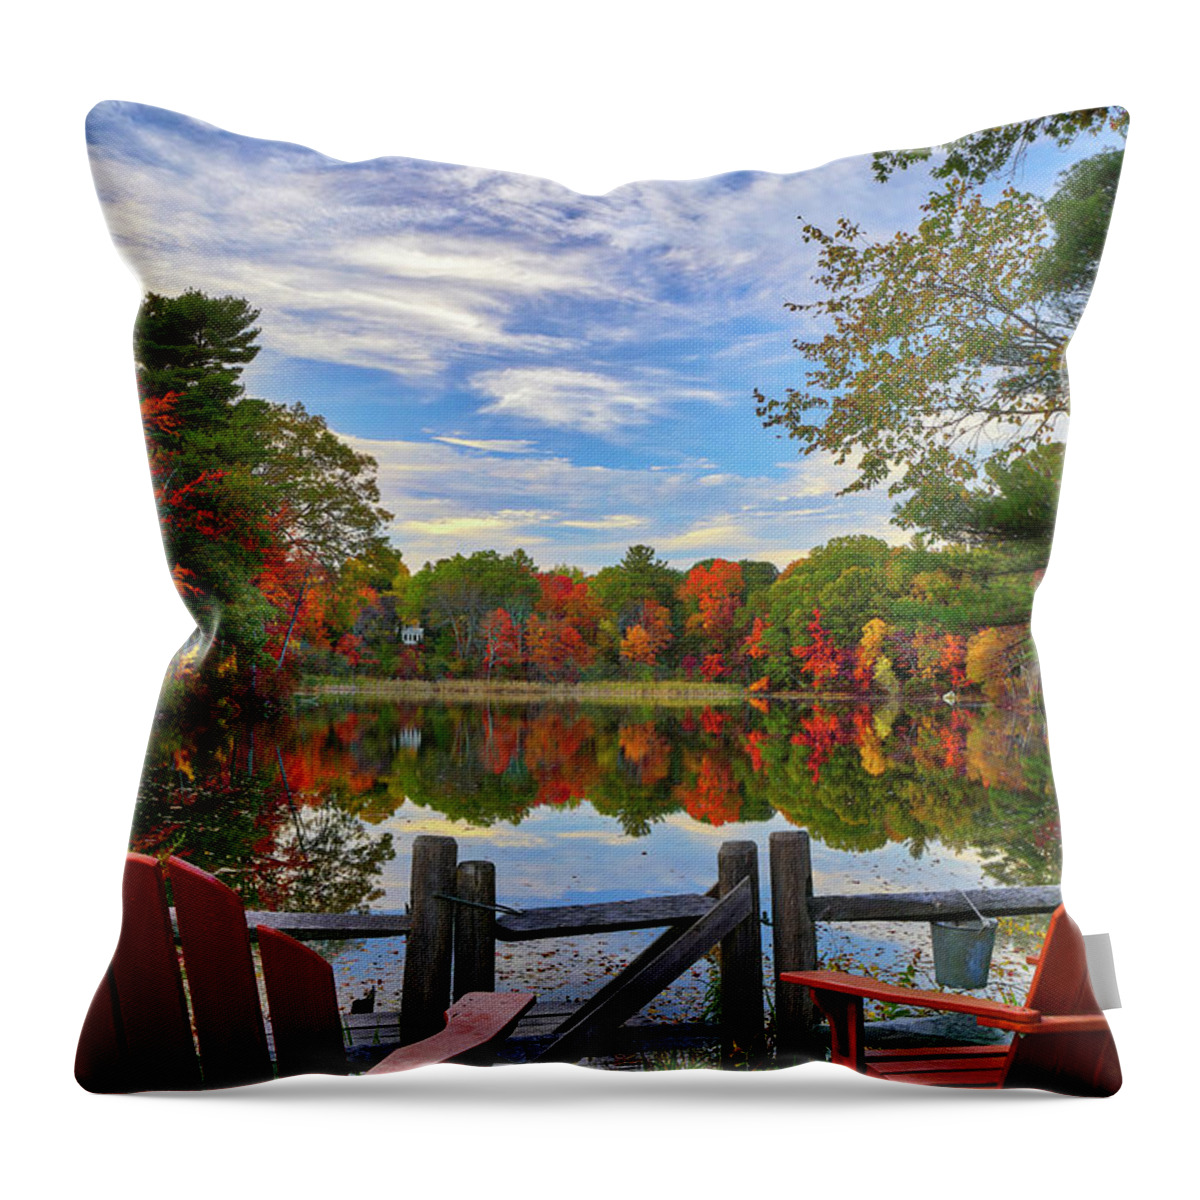 Kingsbury Pond Throw Pillow featuring the photograph Kingsbury Pond in Medfield Massachusetts by Juergen Roth